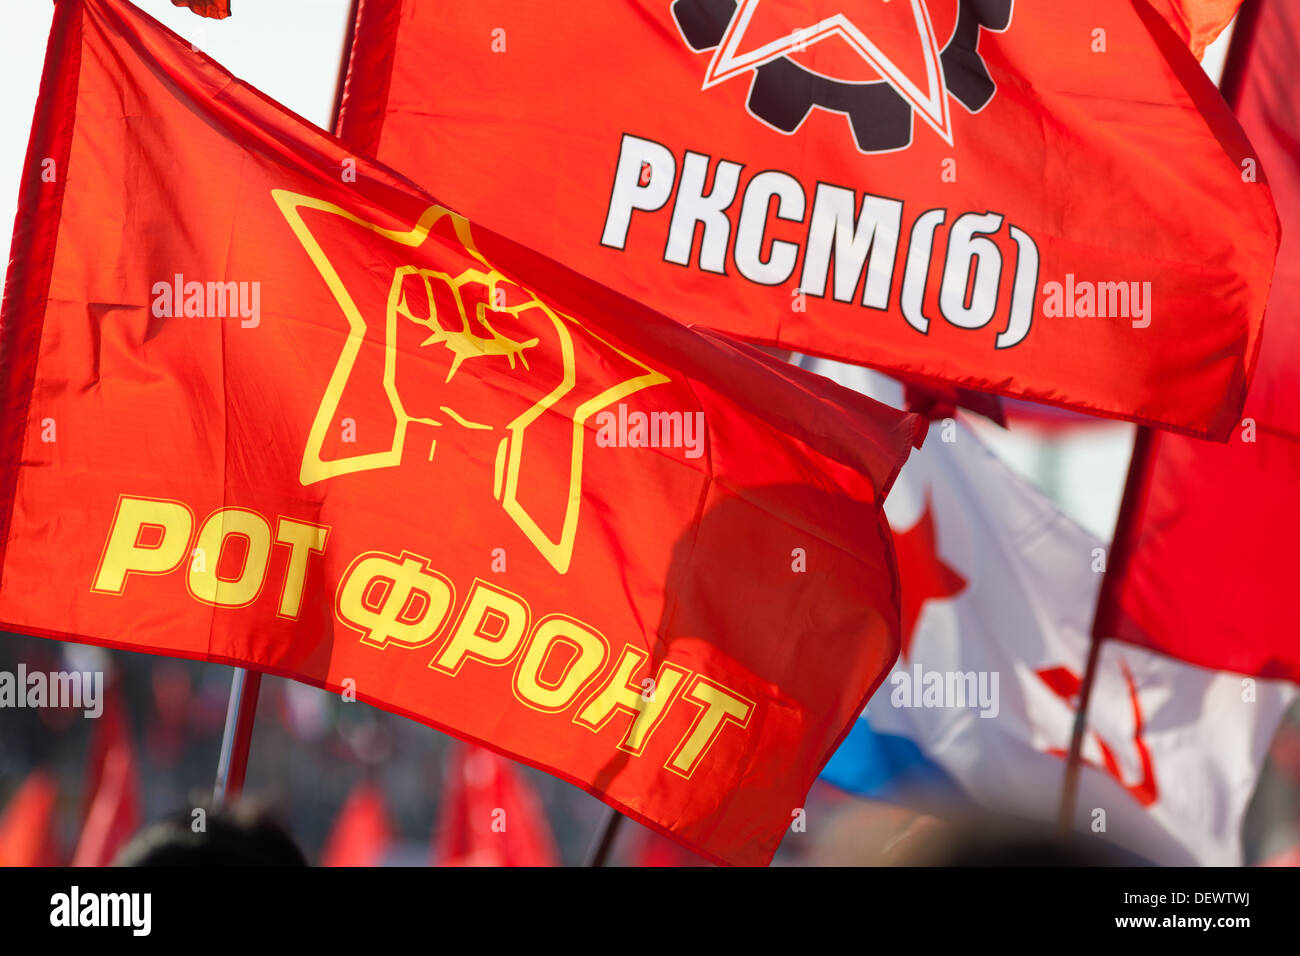 Flags of the Raised fist and Revolutionary Communist Youth League (Bolshevik) Stock Photo